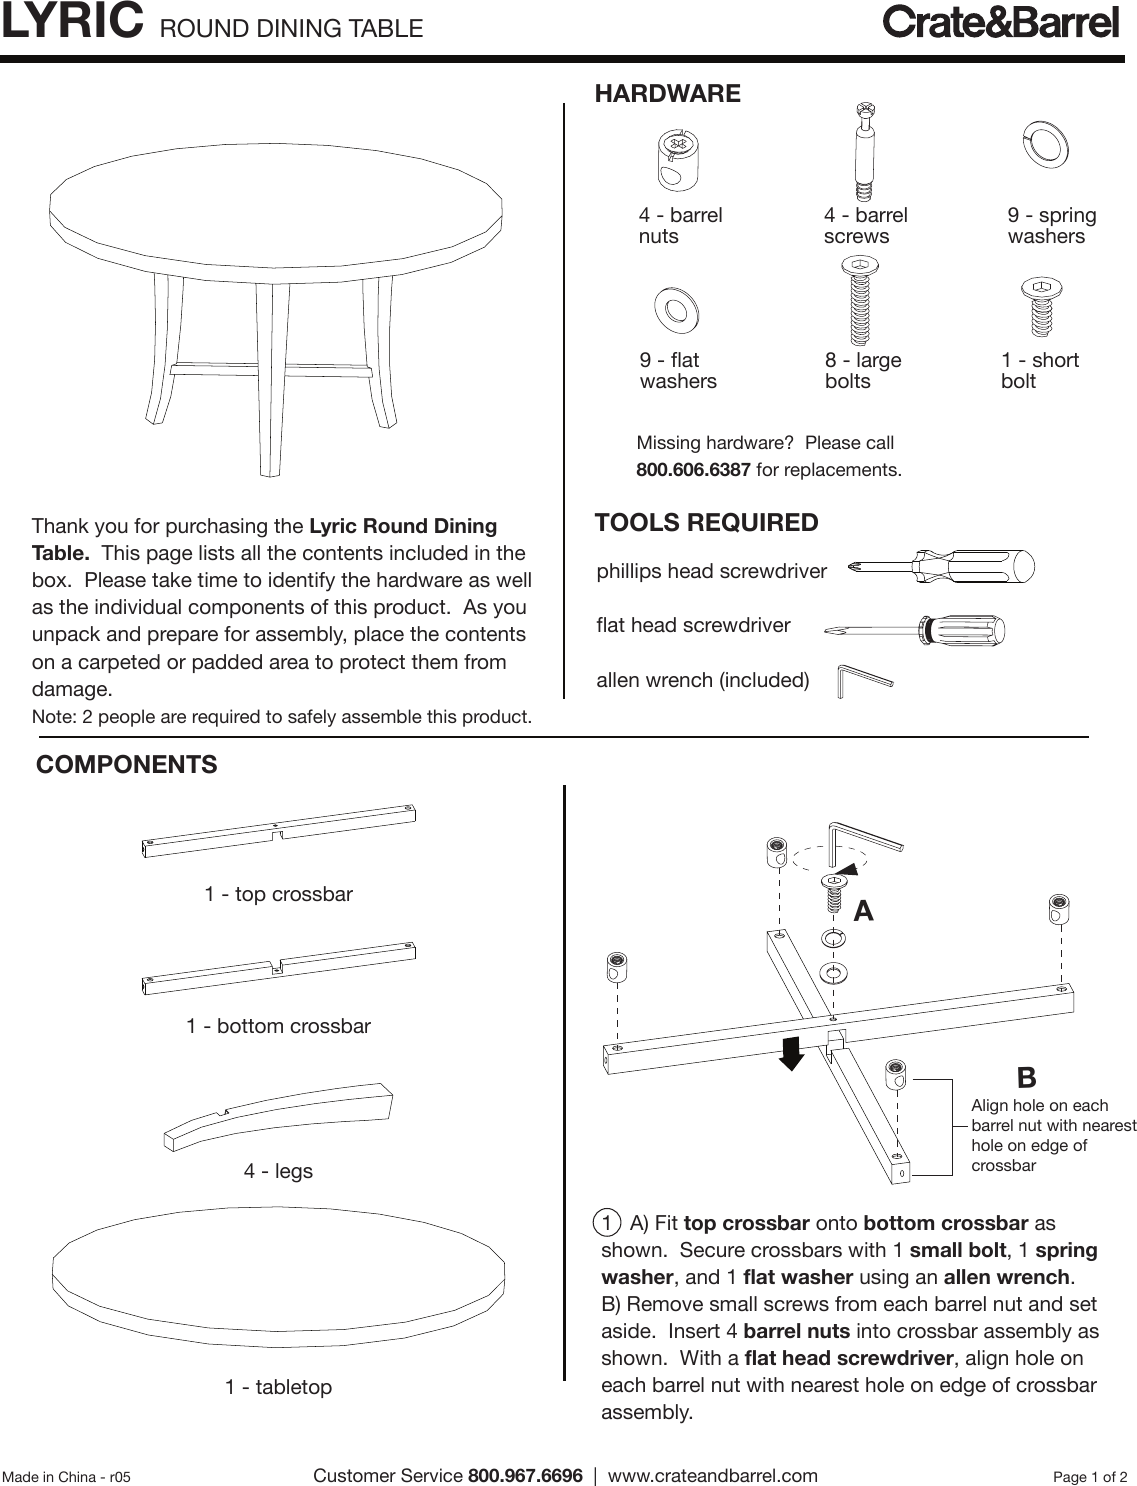 Page 1 of 2 - Crate-Barrel 629-Lyric-Round-Dining-Table Lyric Round Dining Table Assembly Instructions From Crate And Barrel